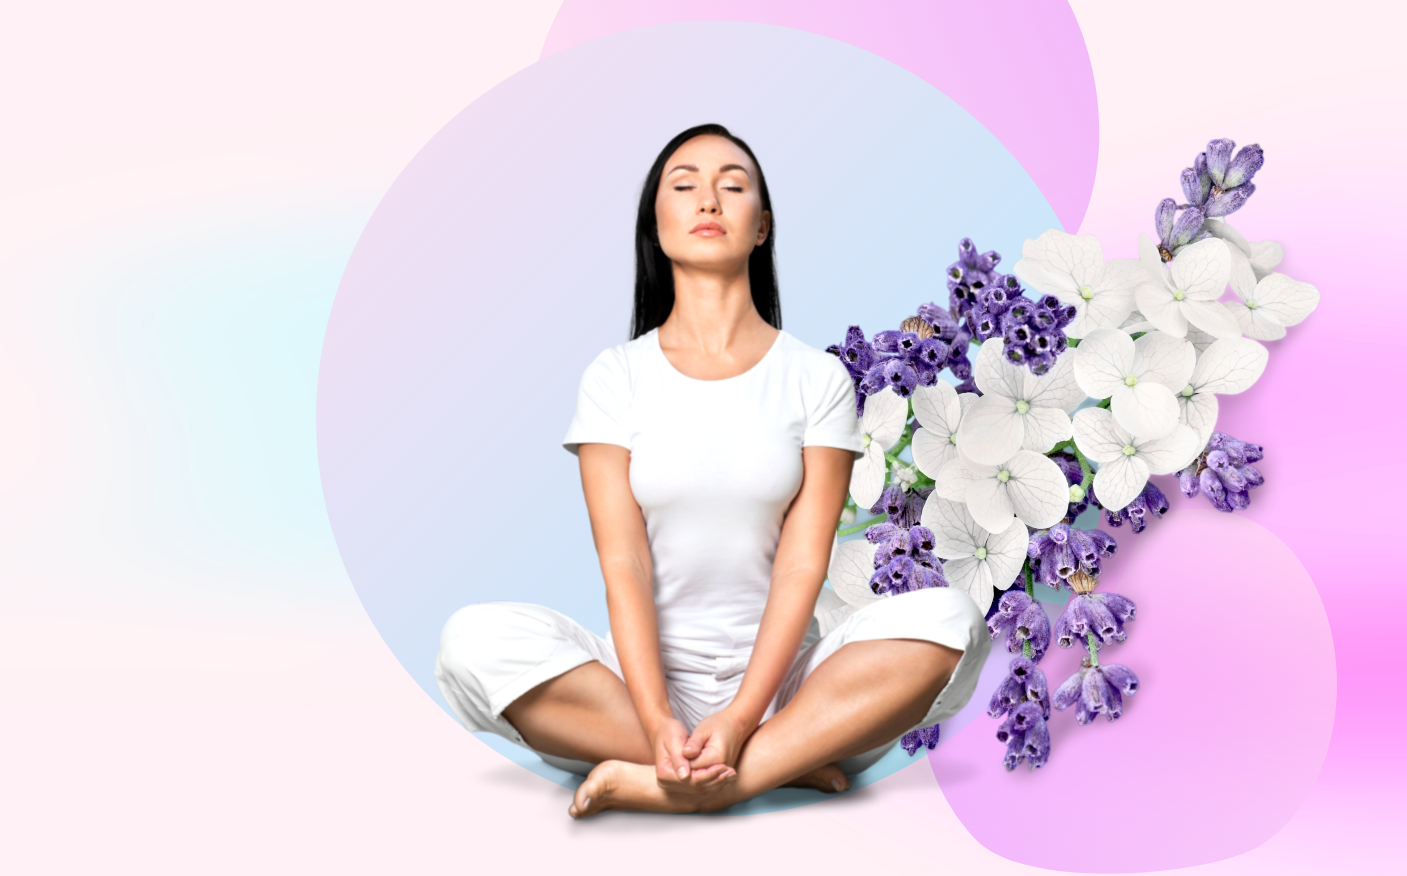 5 Relaxation techniques that will help your GERD and stress